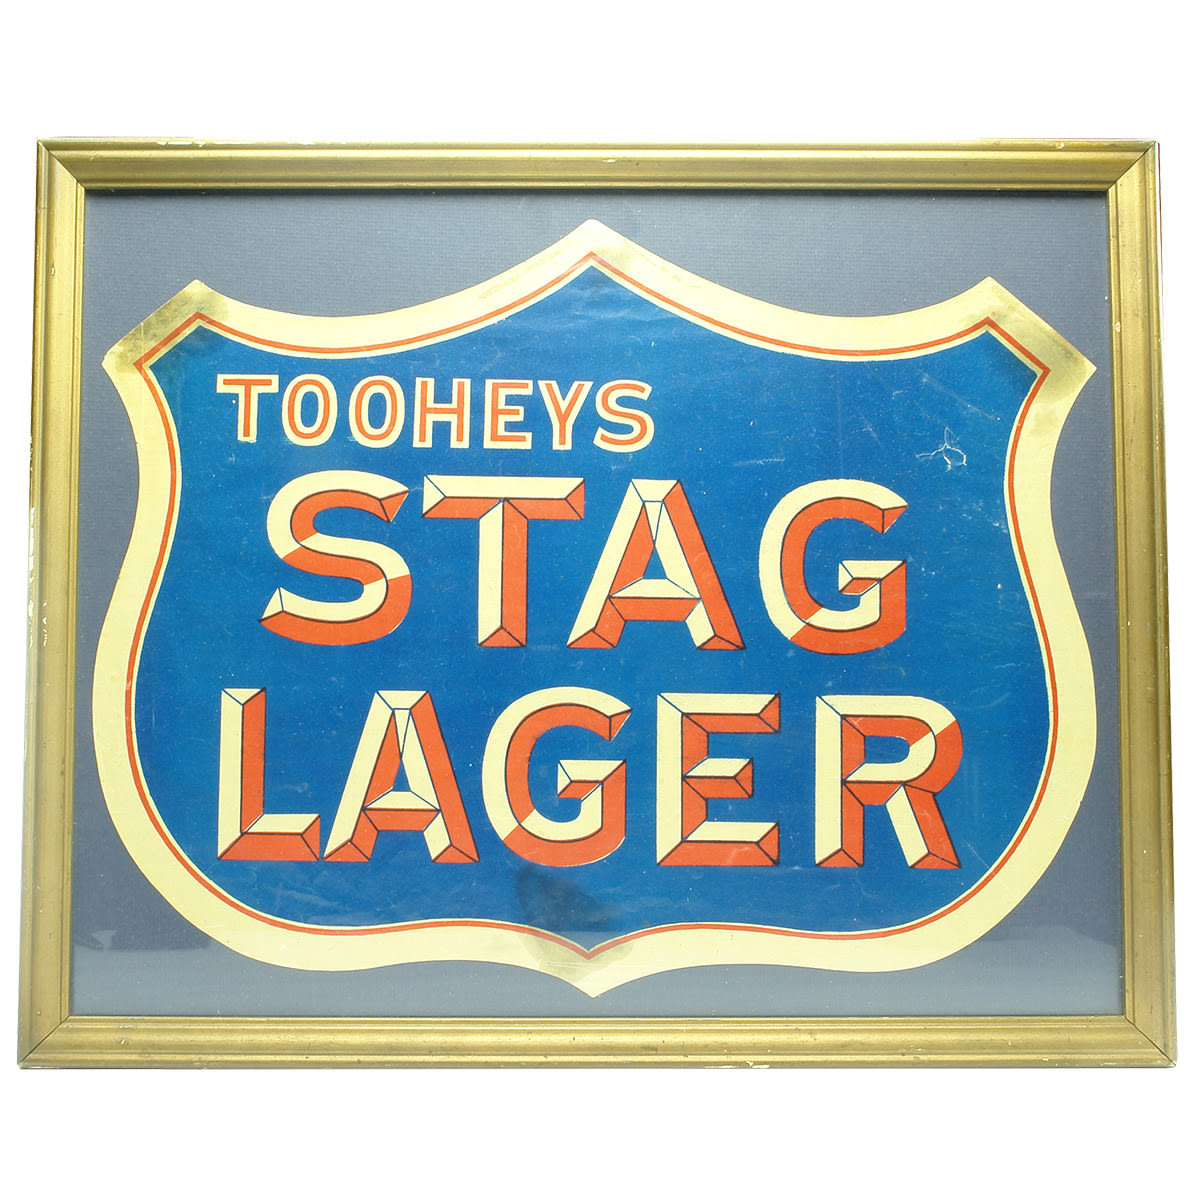 Sign. Giant Tooheys Stag Lager Shield Shape Label in Frame. (New South Wales)